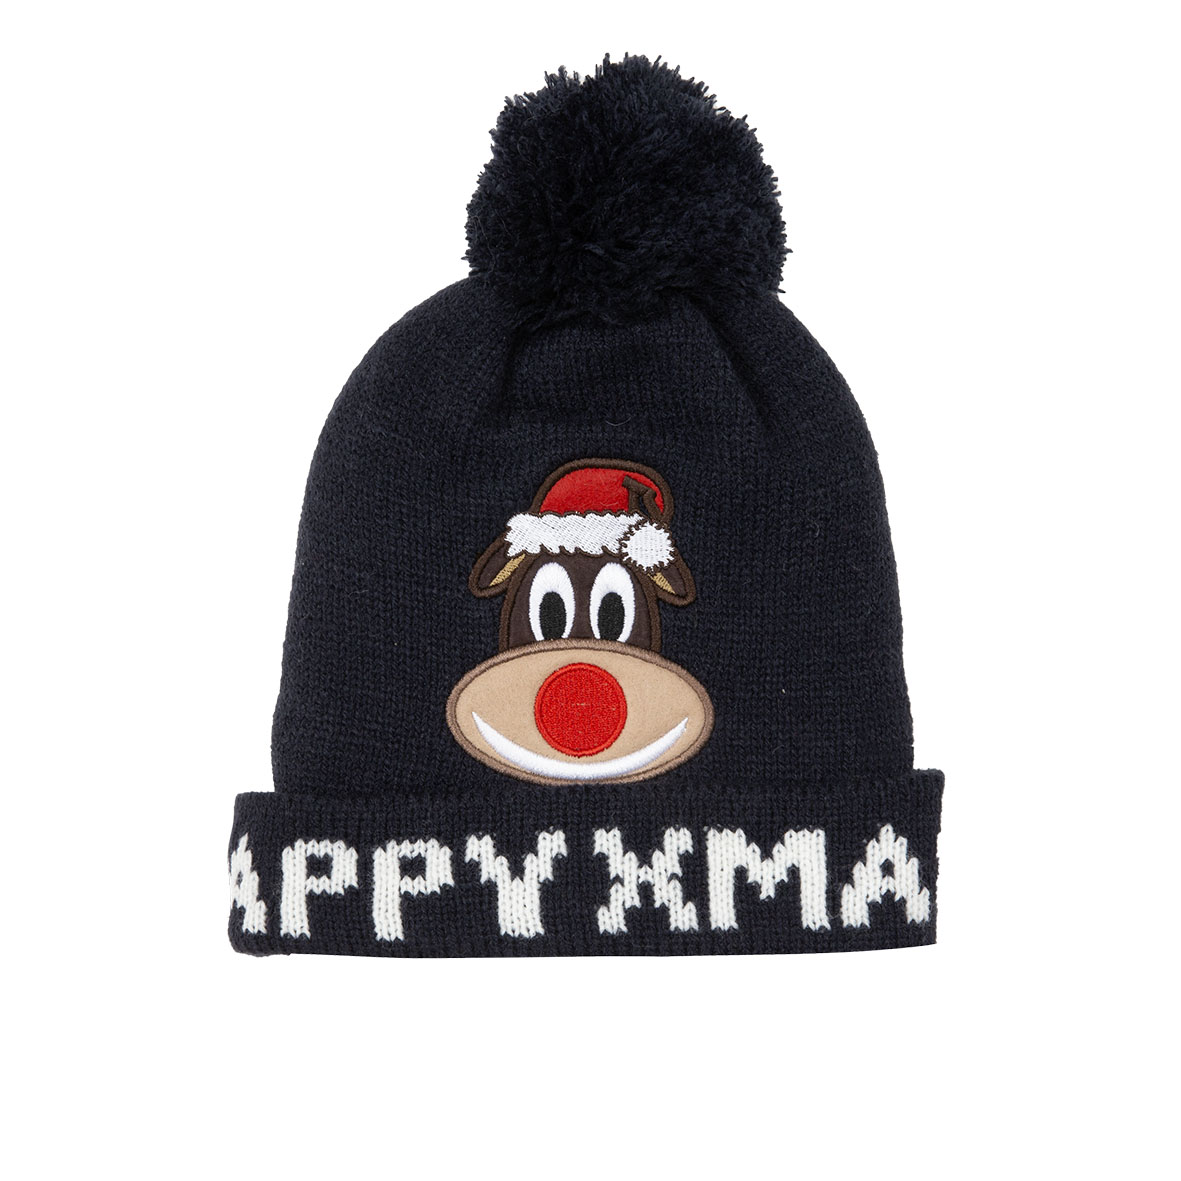 Mawi cappello tricot natale kid - Mawi